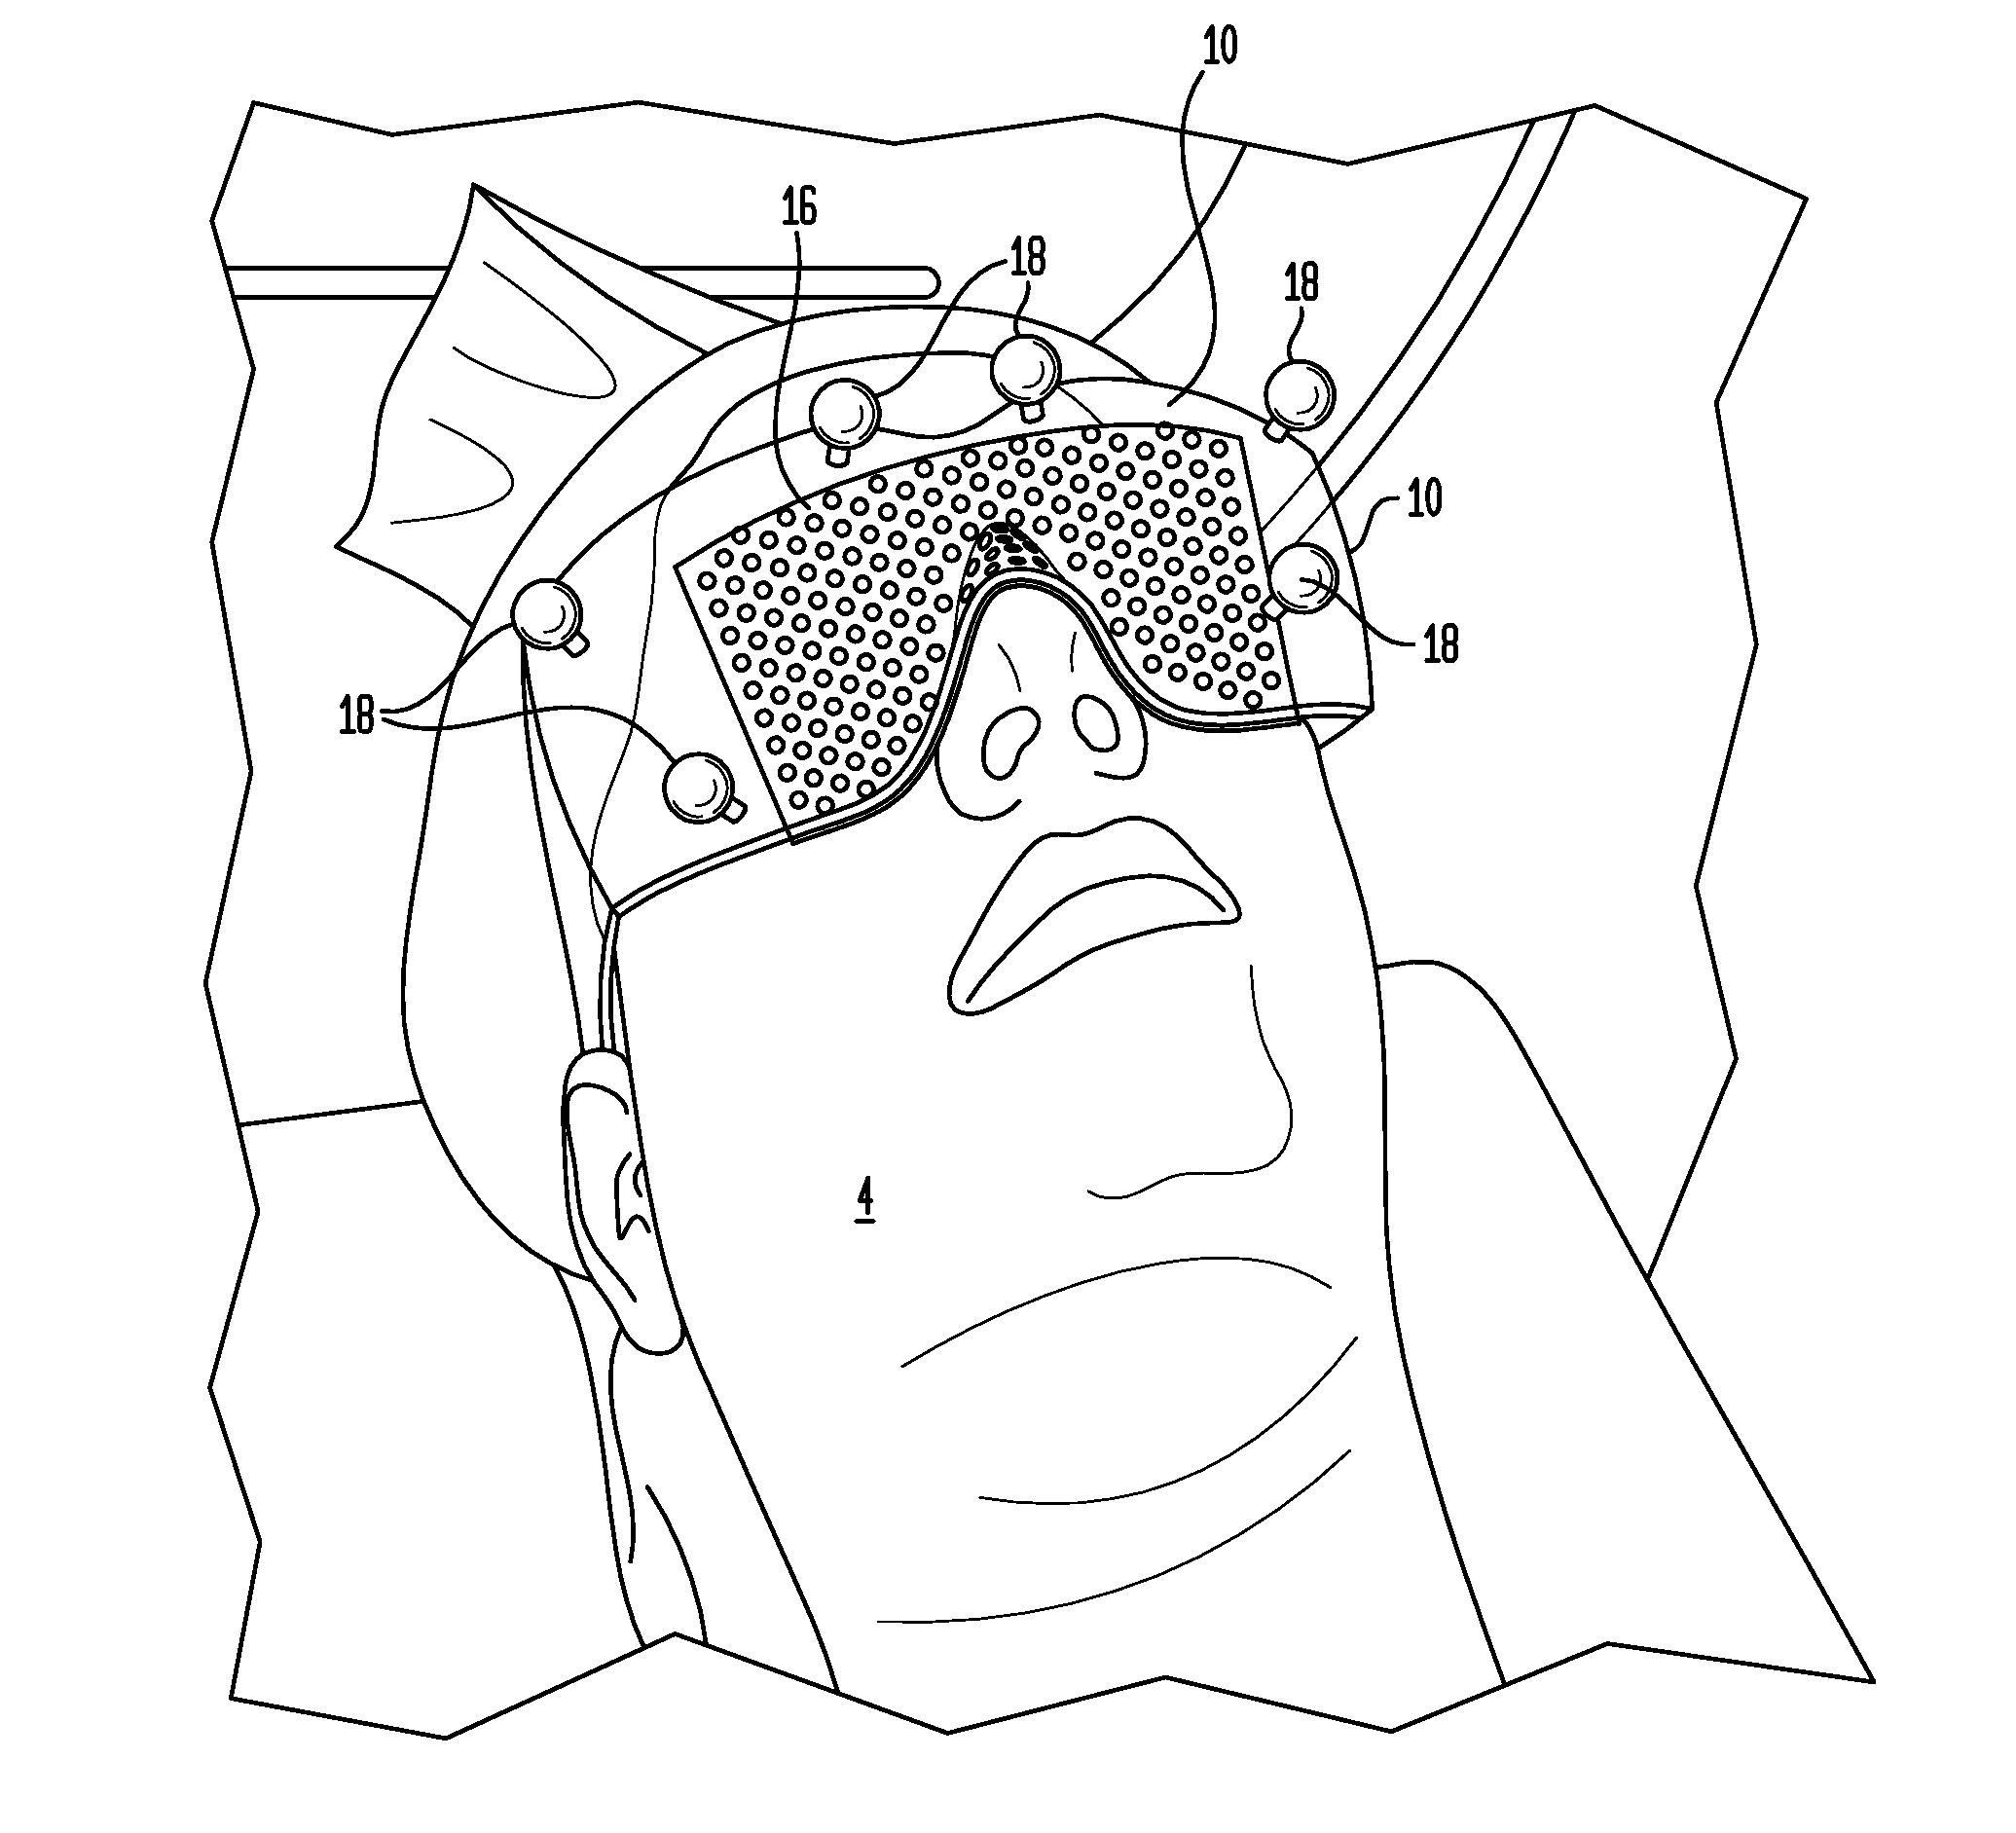 Cranial alignment device for use in intracranial stereotactic surgery